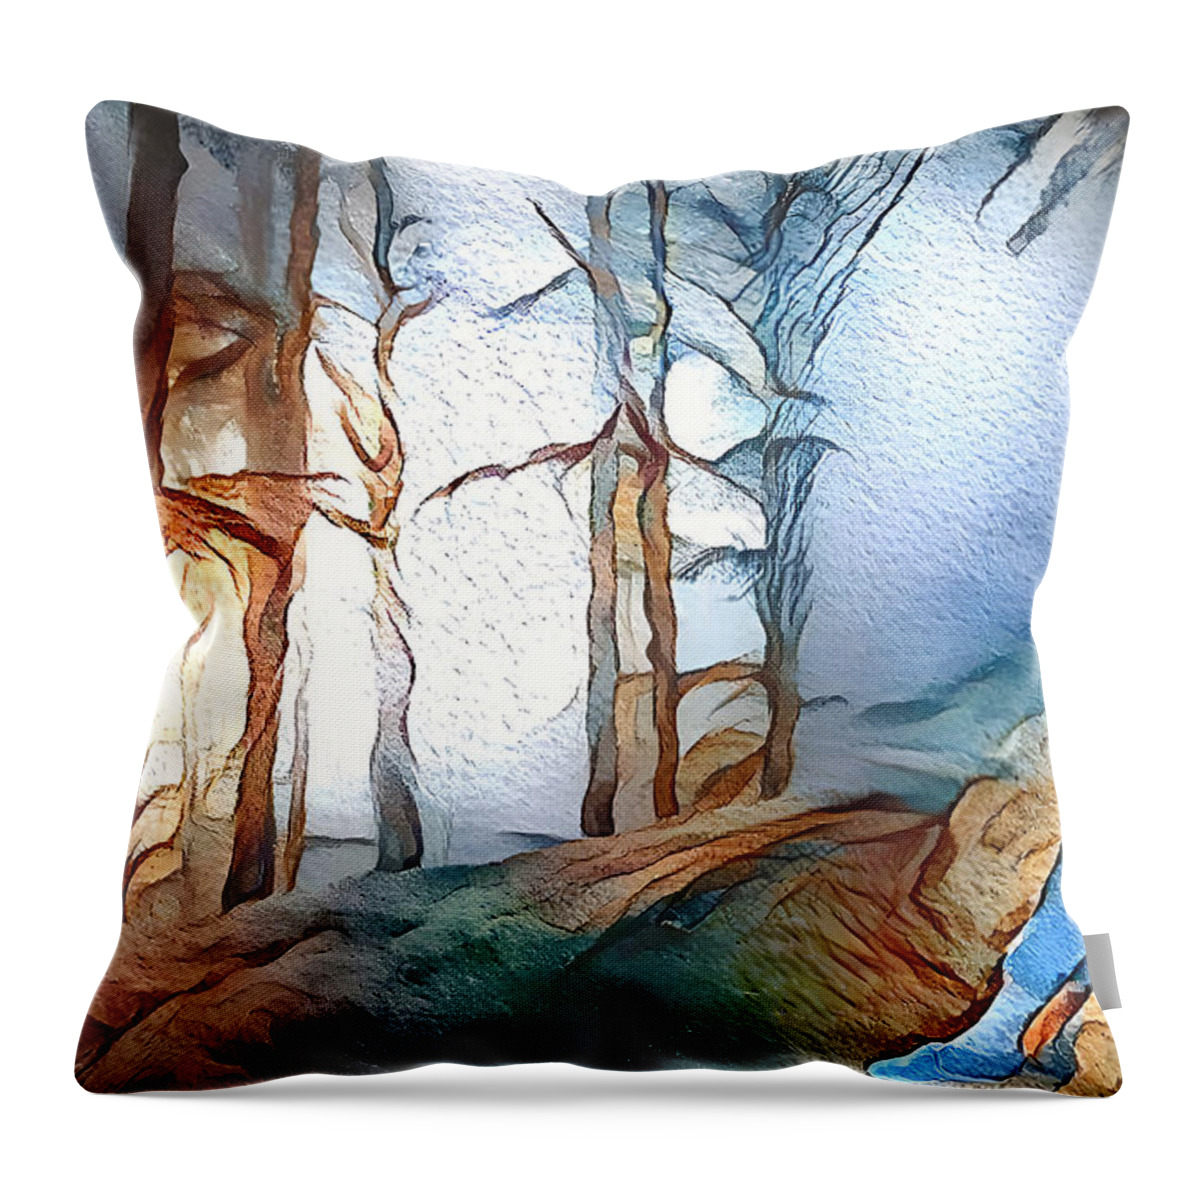 Loneliness Throw Pillow featuring the mixed media Darkness by Frederick Cook